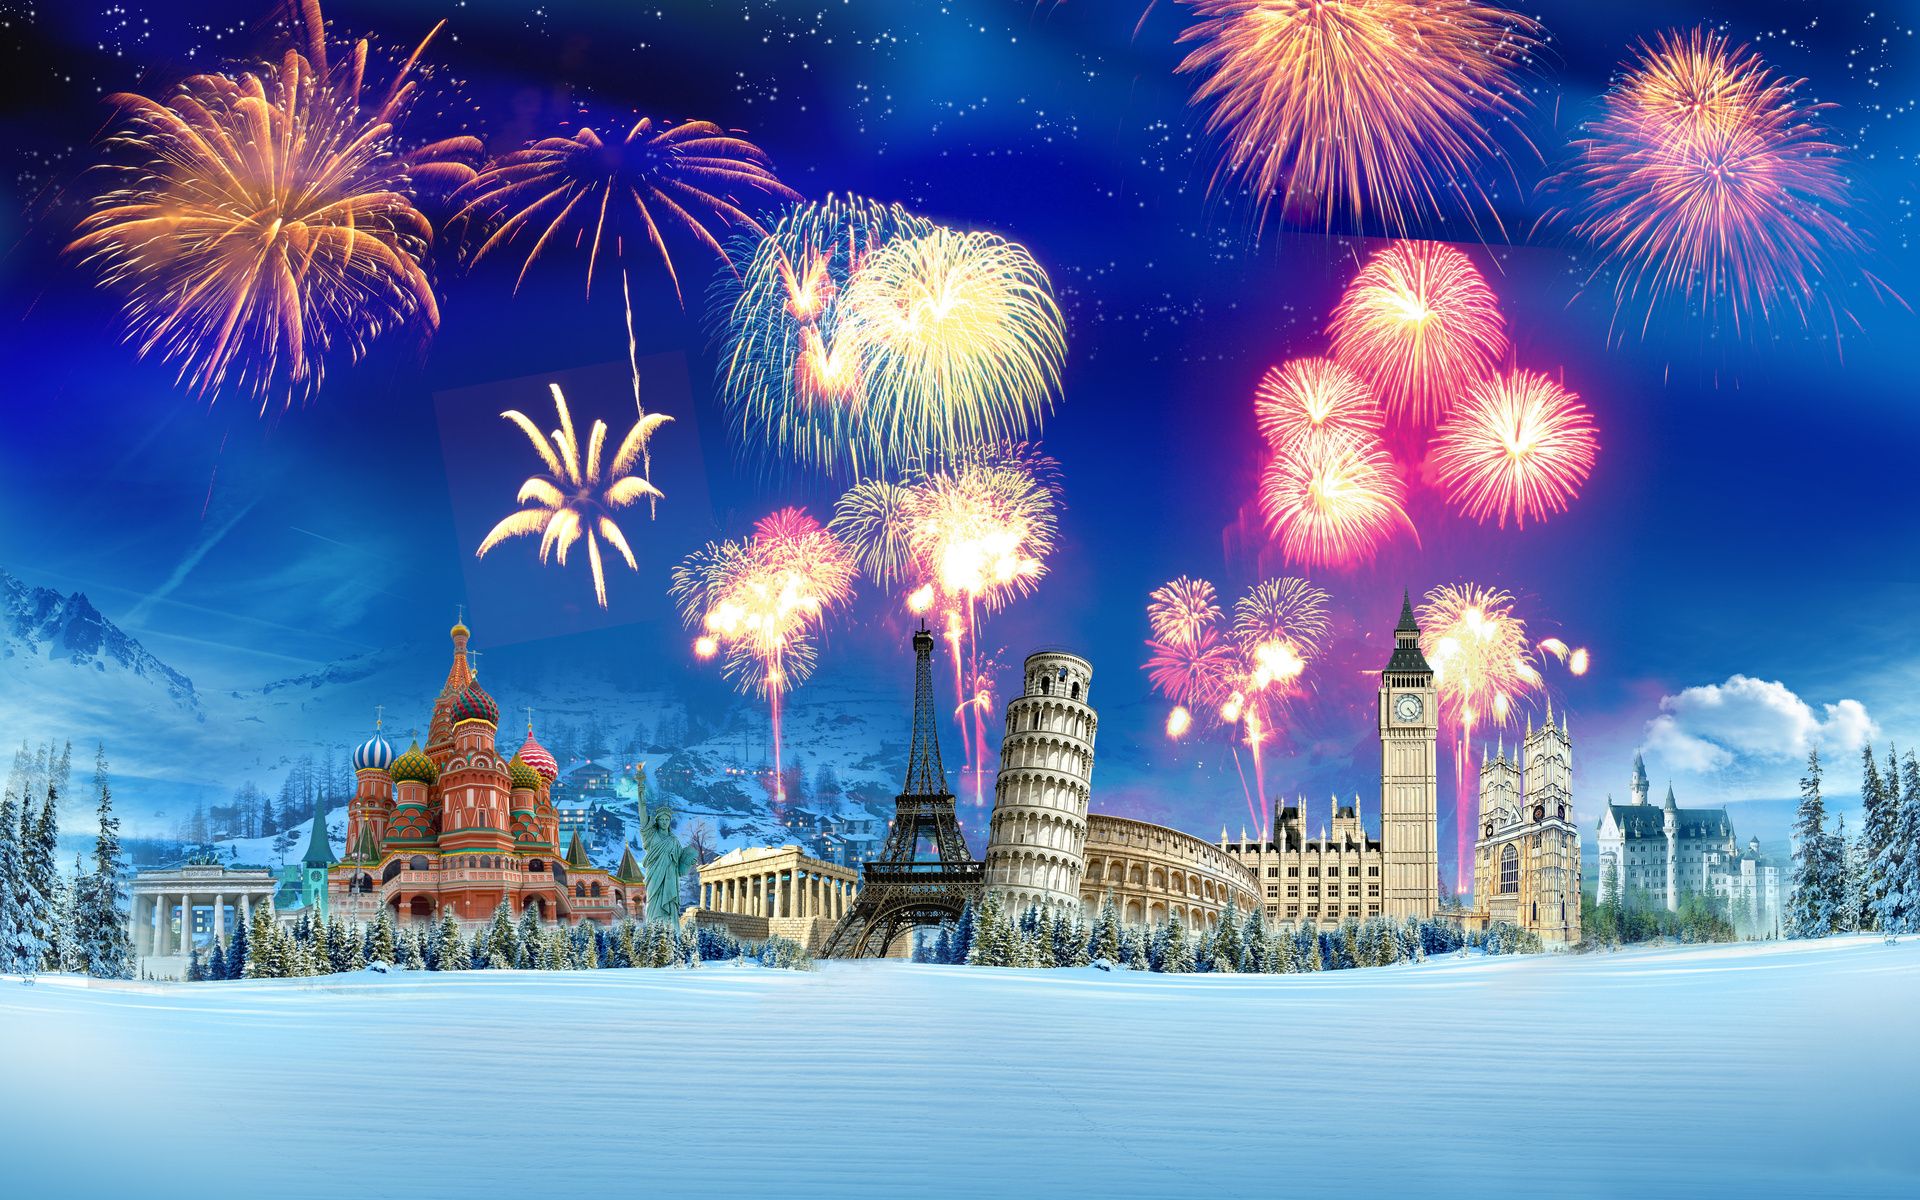 New Years Eve Free Wallpaper, High Definition, High Quality, Widescreen